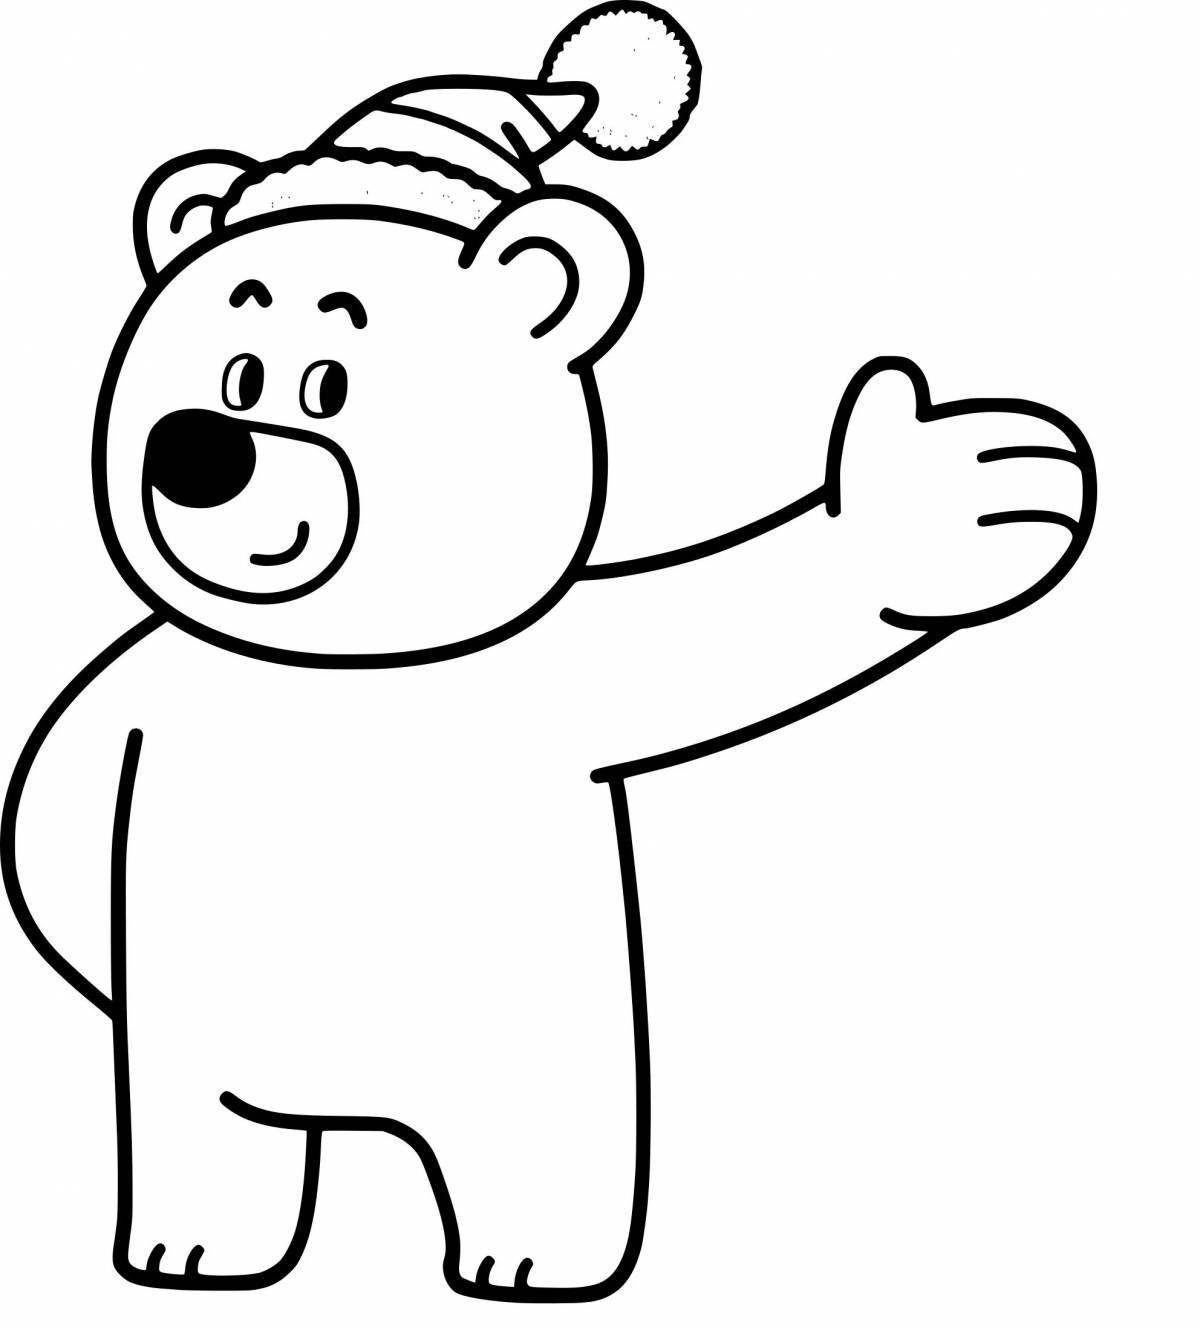 Incredible olympic bear coloring book for kids